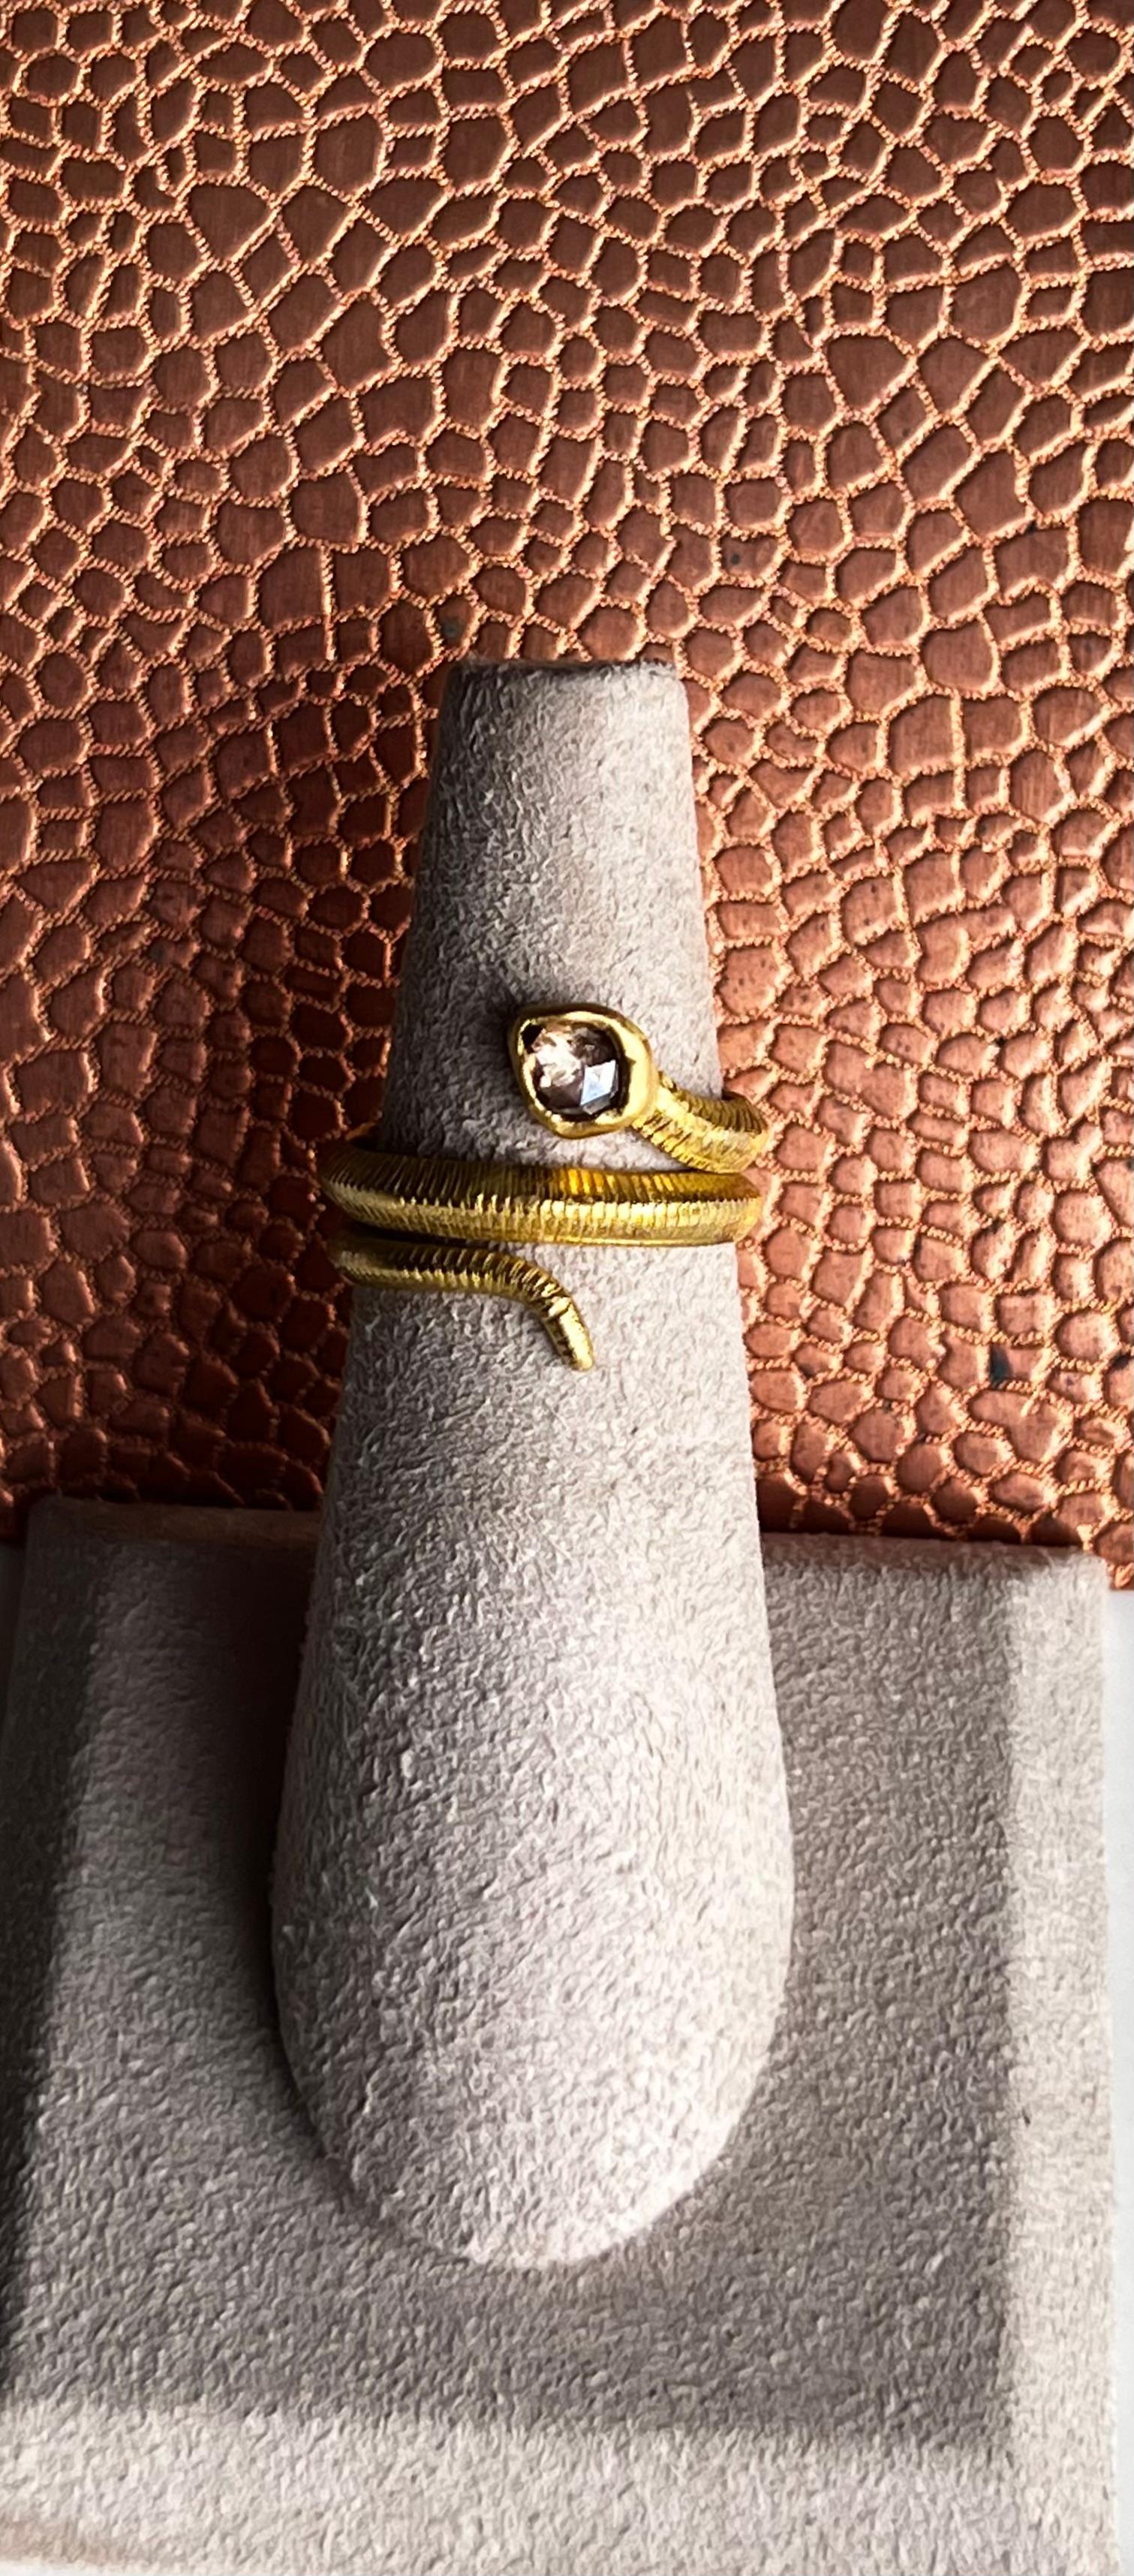 This ring is entirely hand crafted with cognac diamond in lieu of the head of the snake and an engraved texture for the scales. The rich yellow color of 20 karat gold enhances the contrast with the cognac rose cut diamond and is reminiscent of